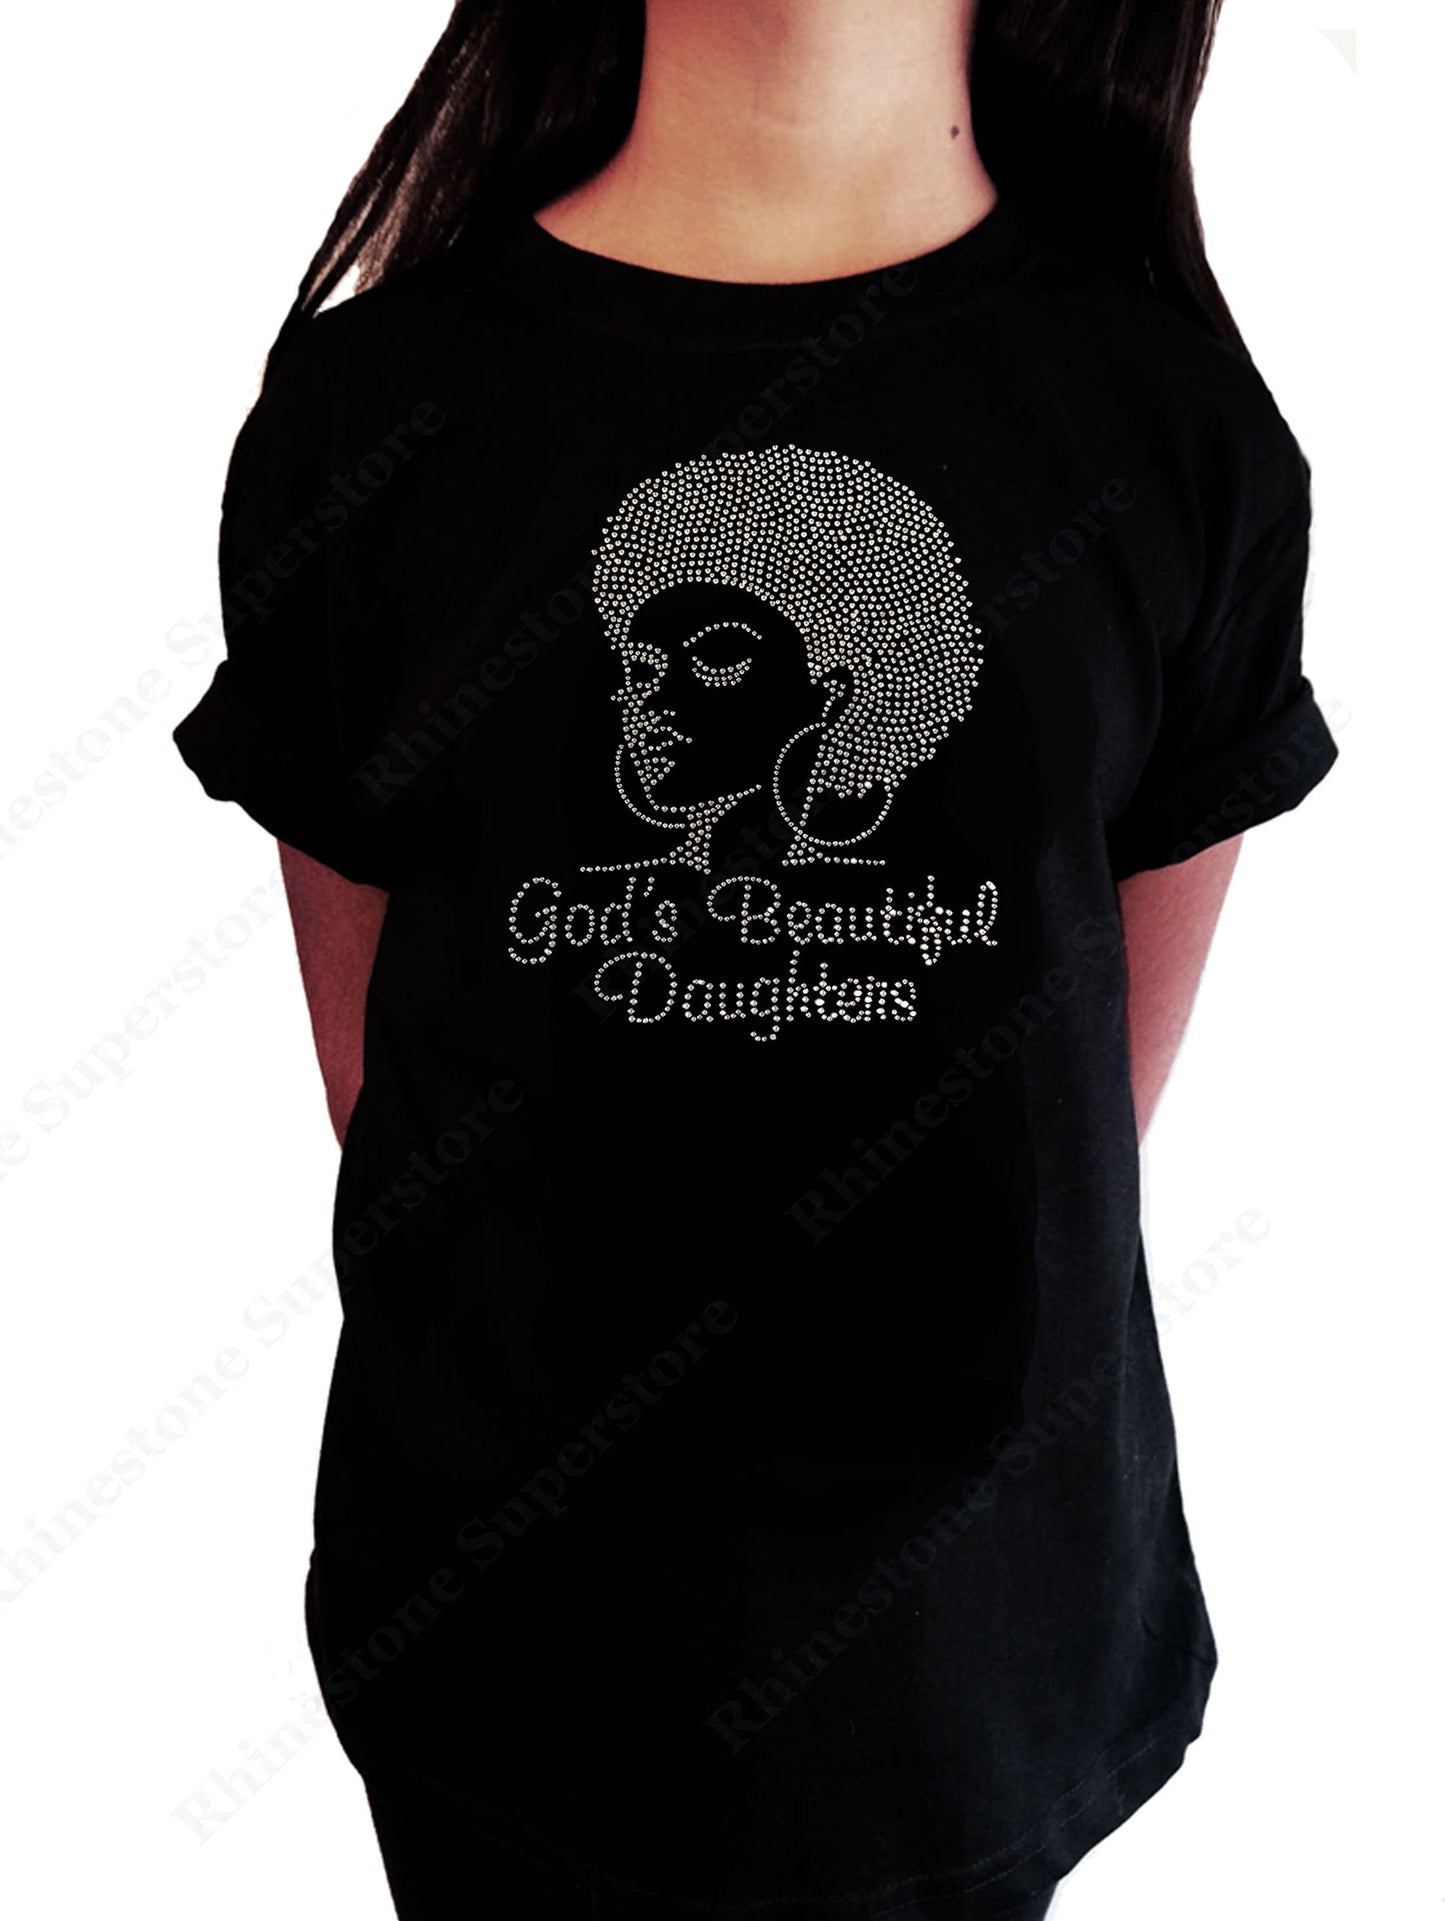 Girls Rhinestone T-Shirt " Afro Girl with God's Beautiful Daughters " Kids Size 3 to 14 Available